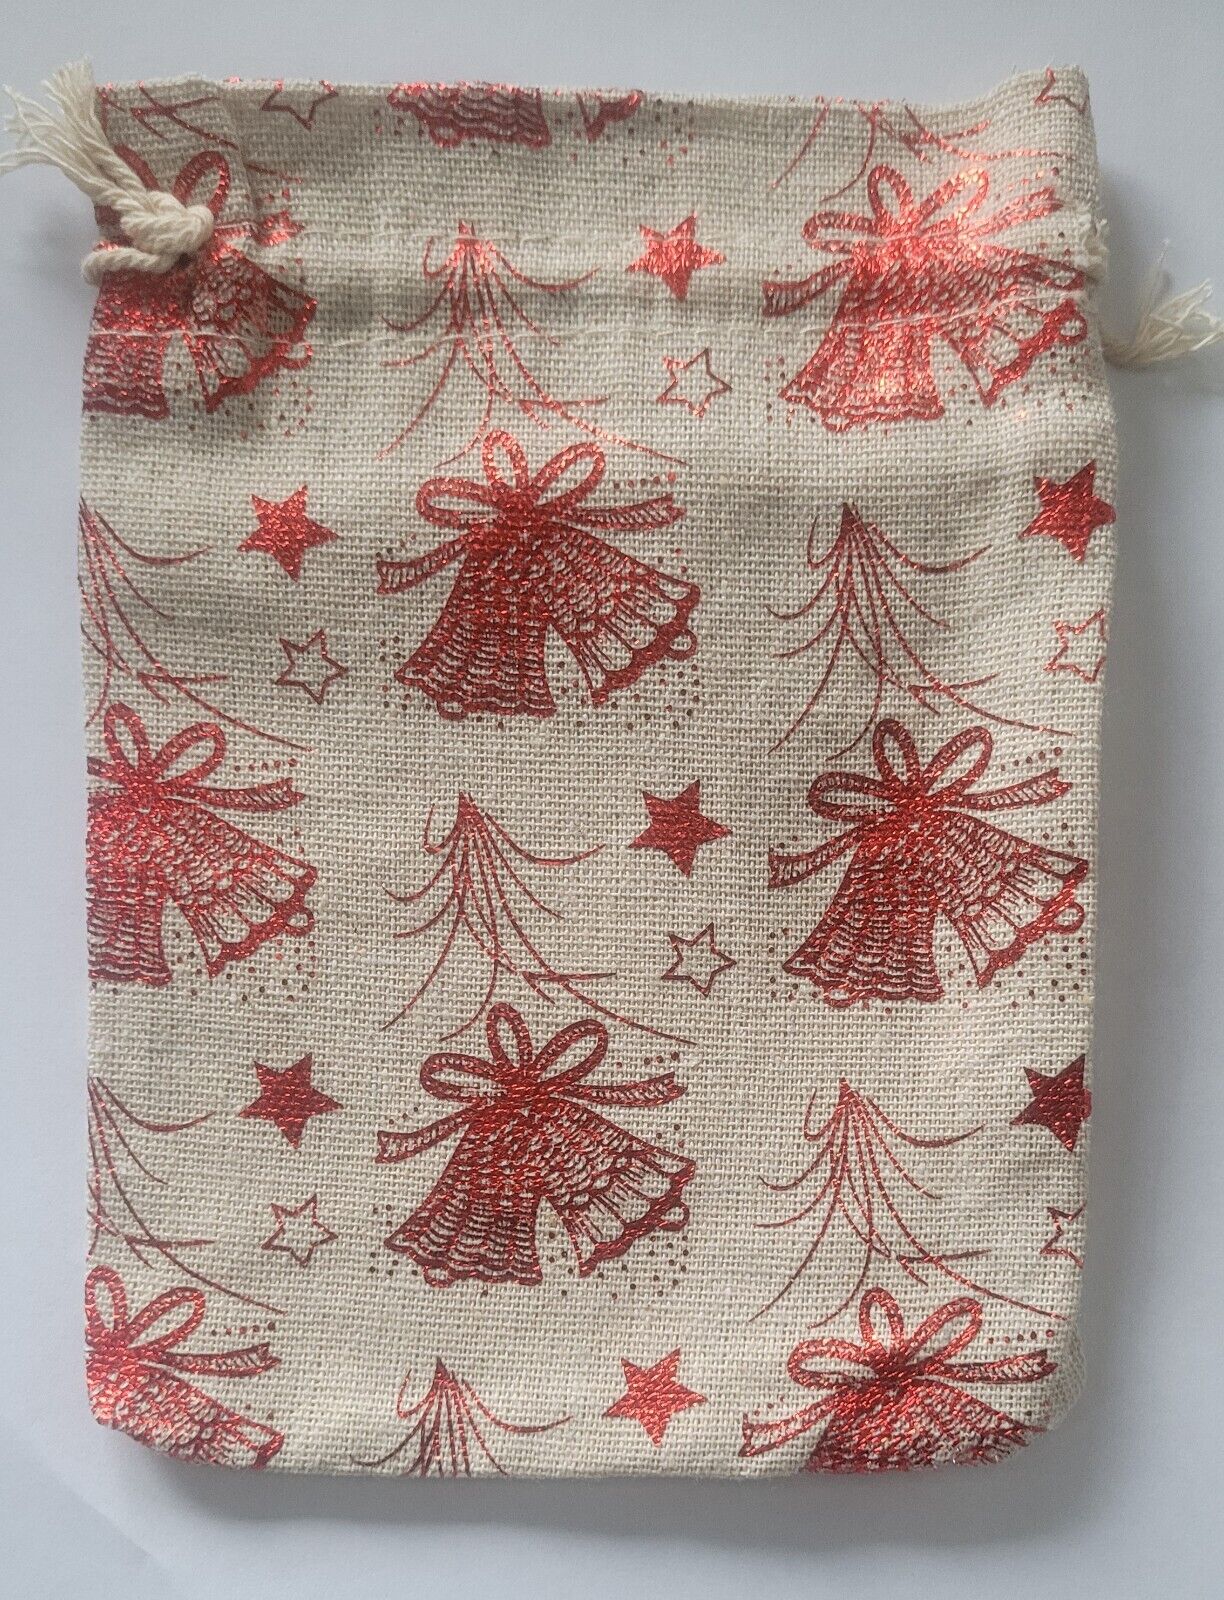 Christmas Drawstring Linen Bags, Gift Bag, Packing Pouch, New 13cm x 18cm